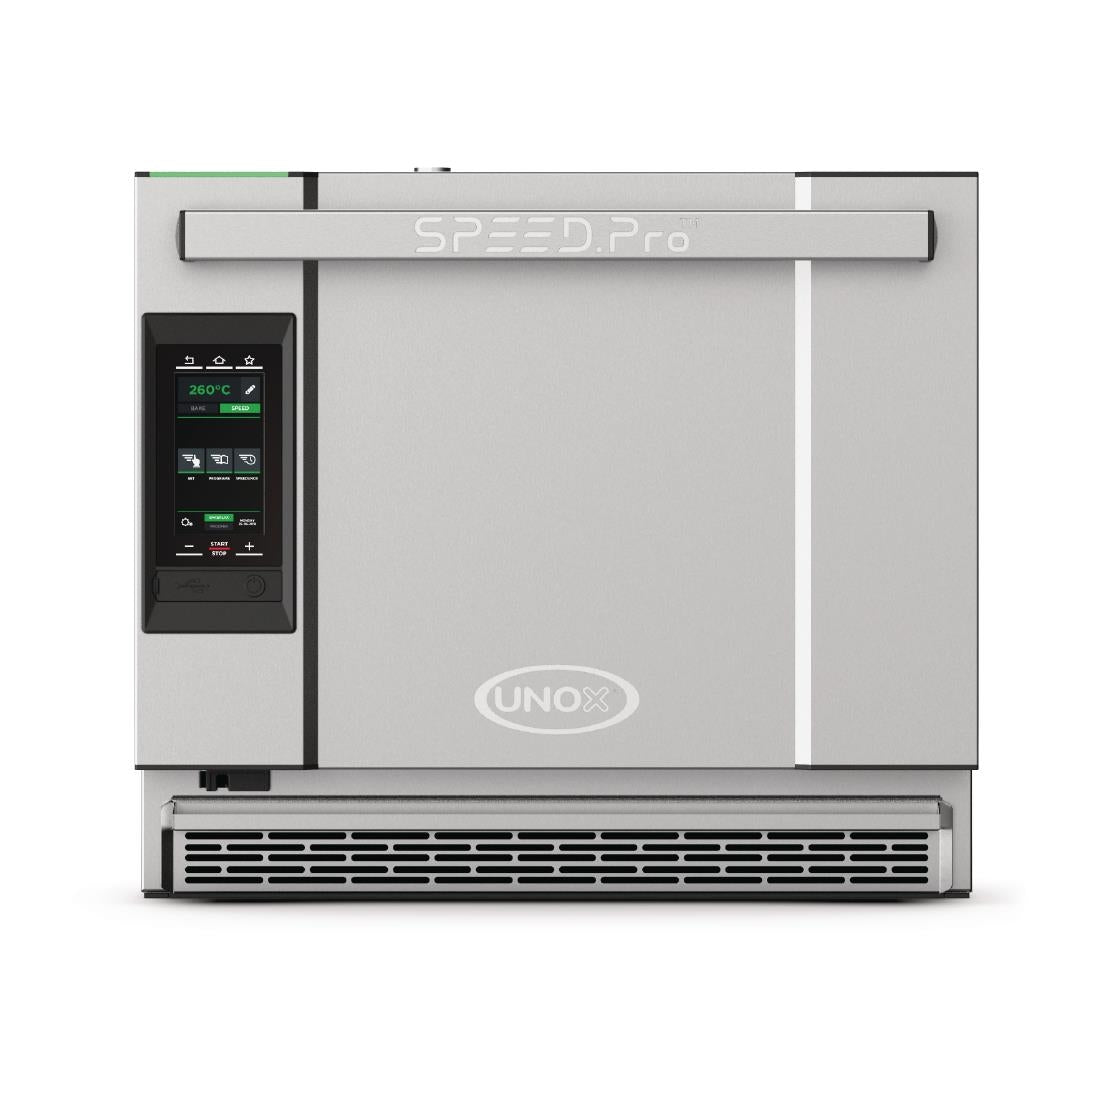 FR896 Unox Bakerlux Speed Pro High Speed Oven 32A Three Phase